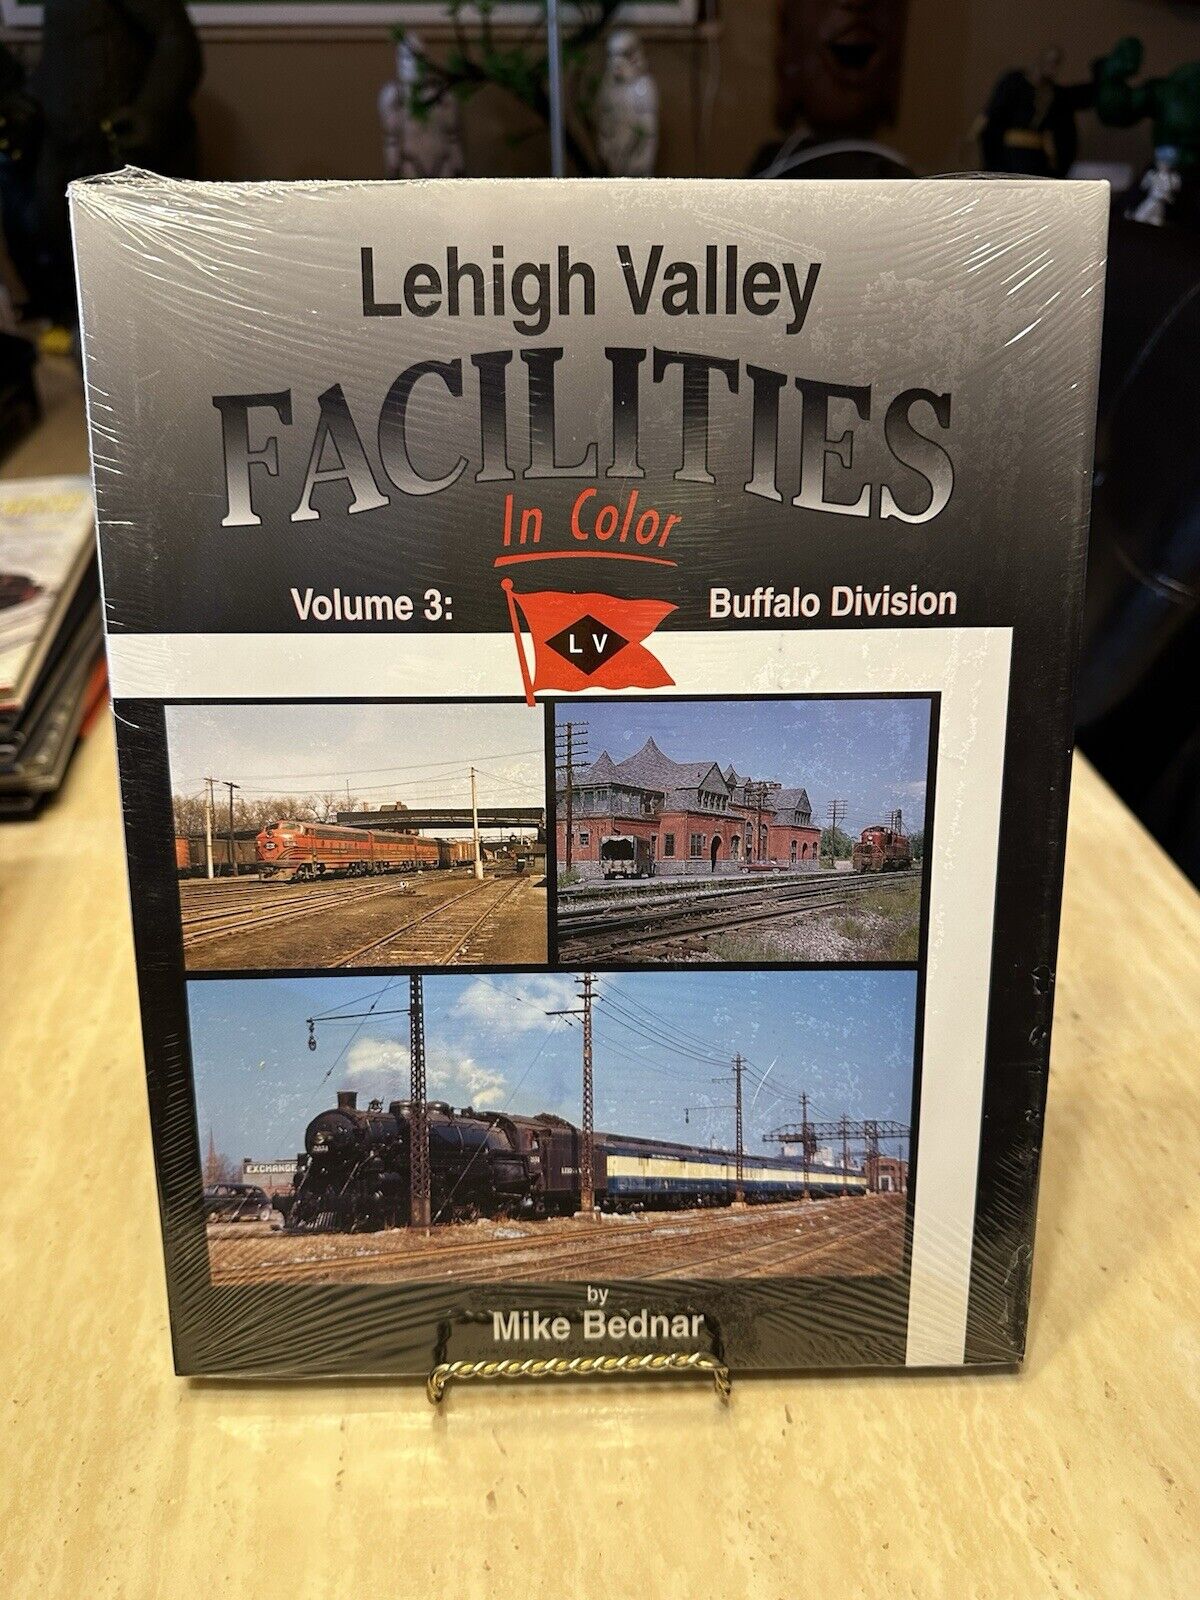 Morning Sun: Lehigh Valley Facilities Volume 3 by Mike Bednar ©2009 HC Book 